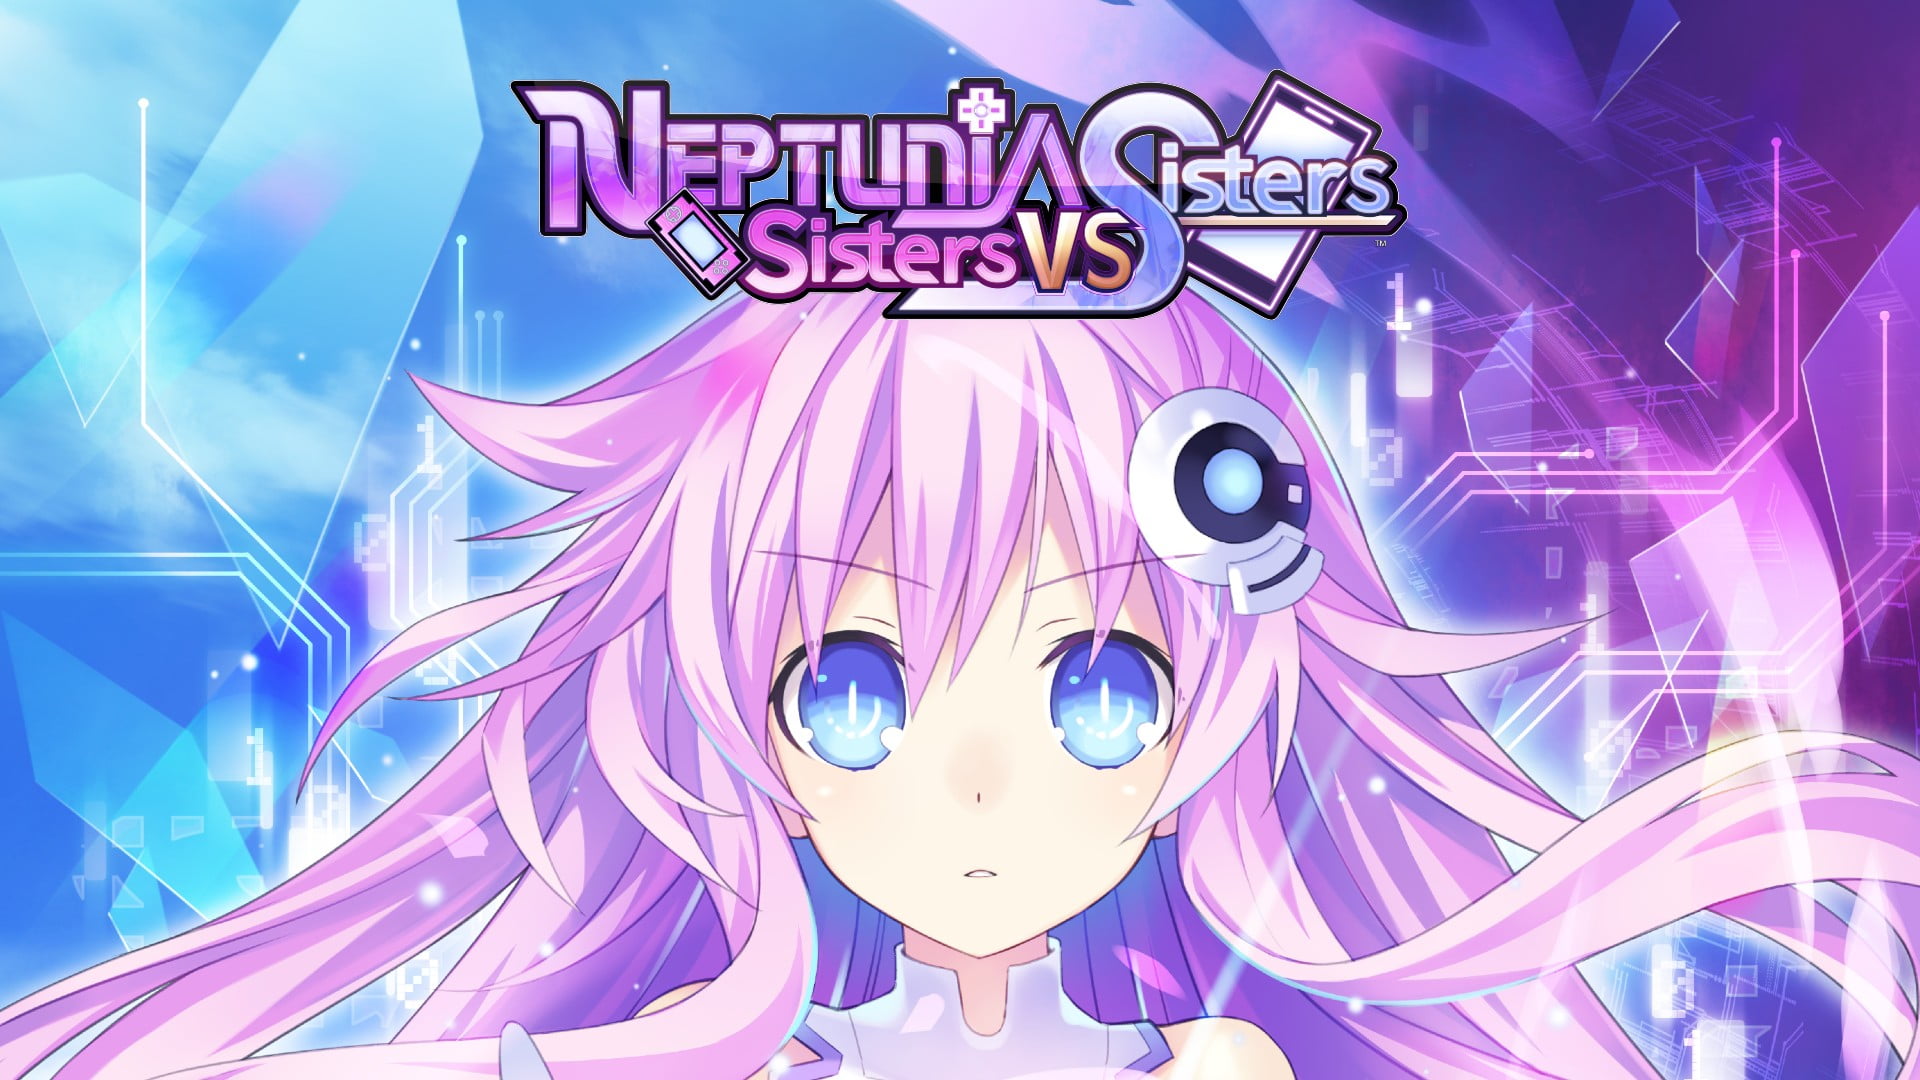 Neptunia: sisters vs sisters. Neptunia: sisters vs sisters Cover. Misato Princess connect. V sisters